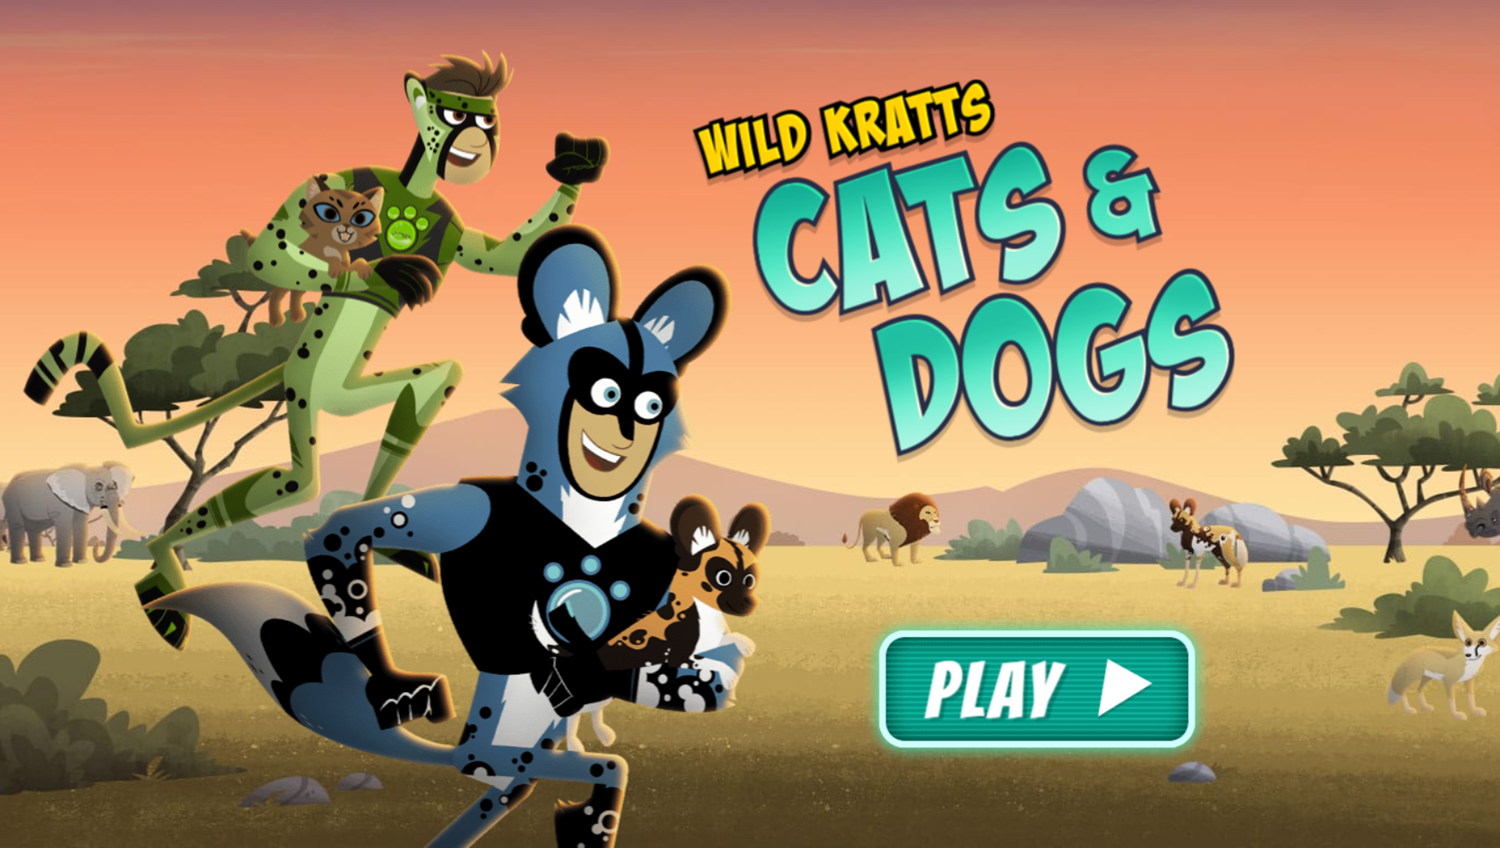 Wild Kratts Cats and Dogs Game Welcome Screen Screenshot.